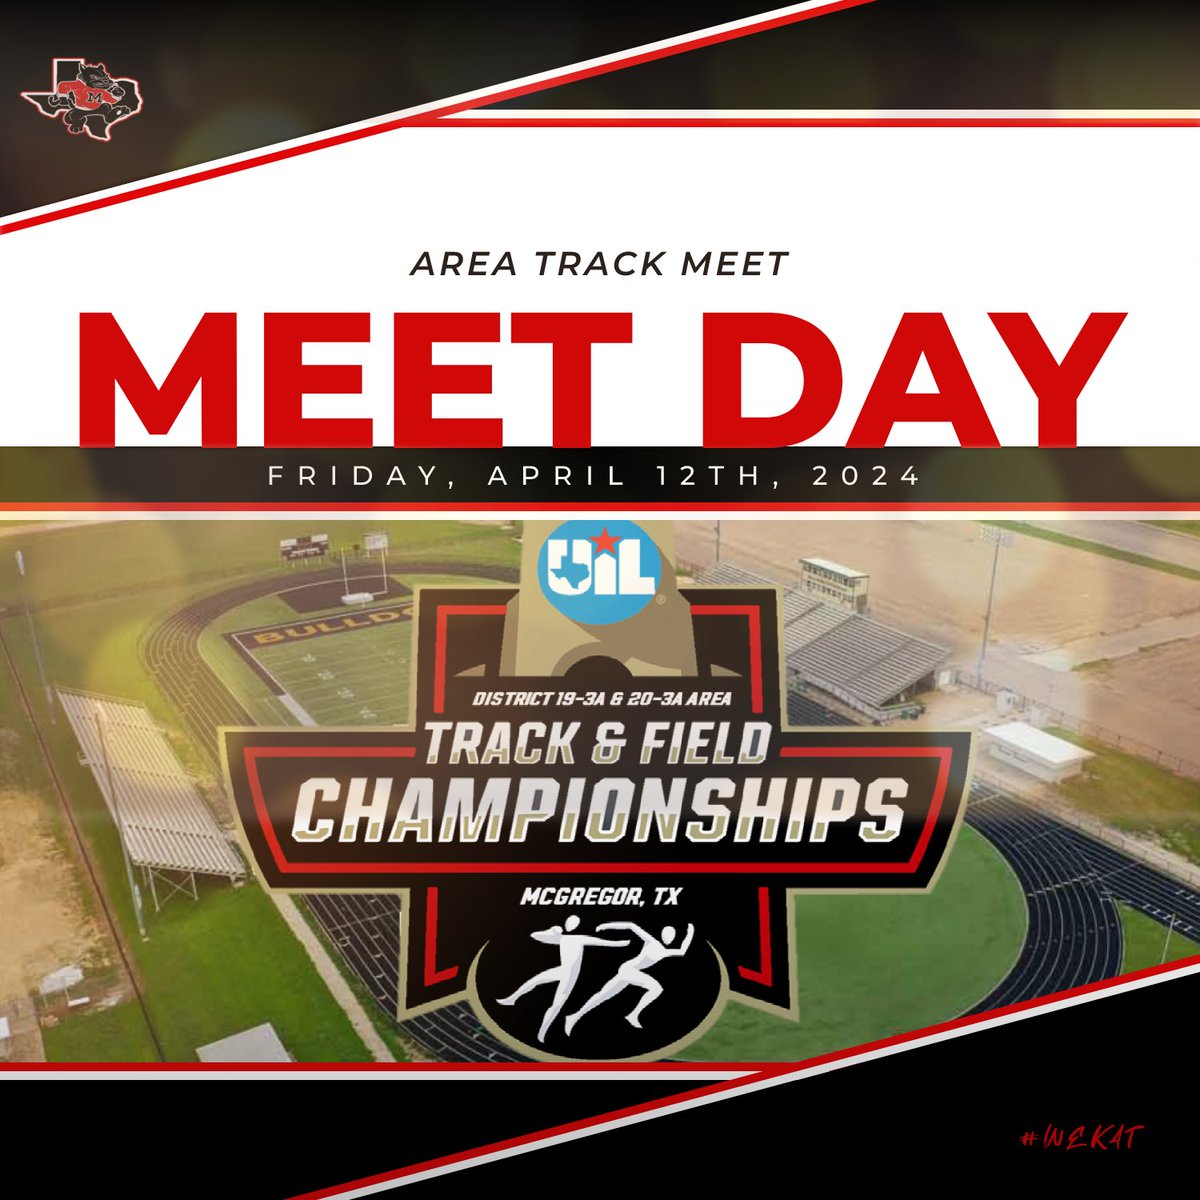 It’s Area Track Meet Day! The Blackcats and Ladycats compete today in McGregor as they look to advance to Regionals! #WEKAT Ladycats 4x1 Relay- Haylee Fitch, Mackenzie Harris, Mariah Hall, Triniti Reagor 100m- Triniti Reagor 200m- Triniti Reagor Shot Put- Ja’Calinn…